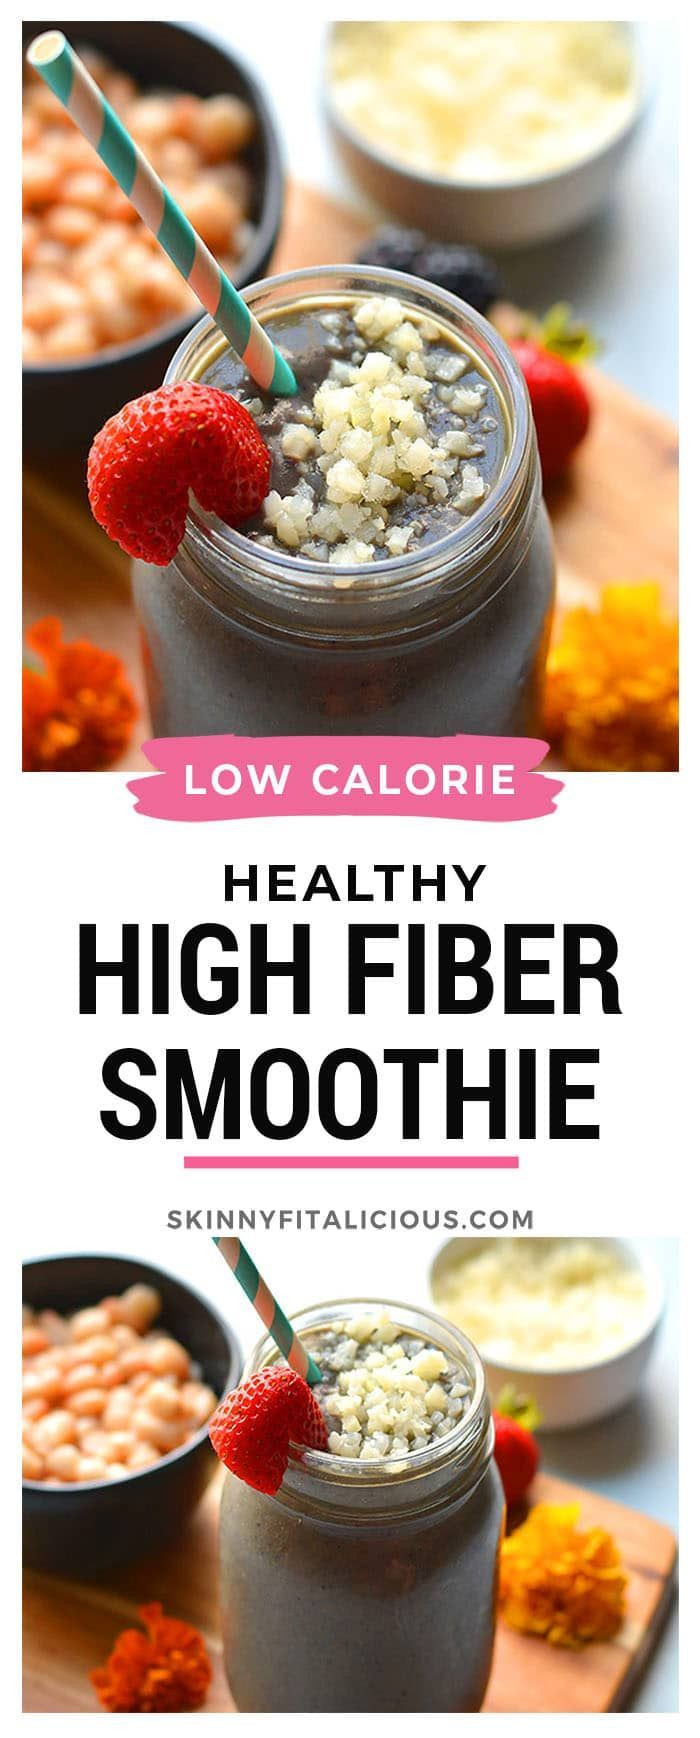 High Fiber Recipes For Weight Loss
 High Fiber Protein Smoothie in 2020